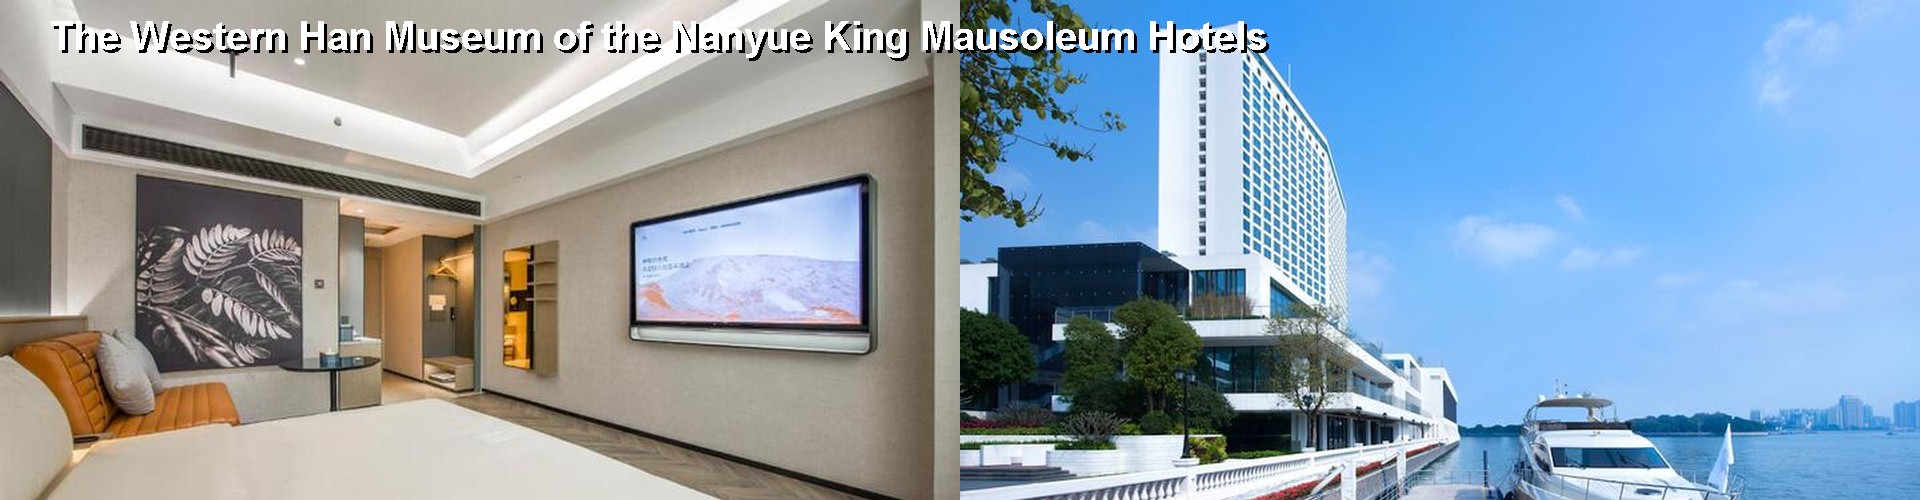 2 Best Hotels near The Western Han Museum of the Nanyue King Mausoleum